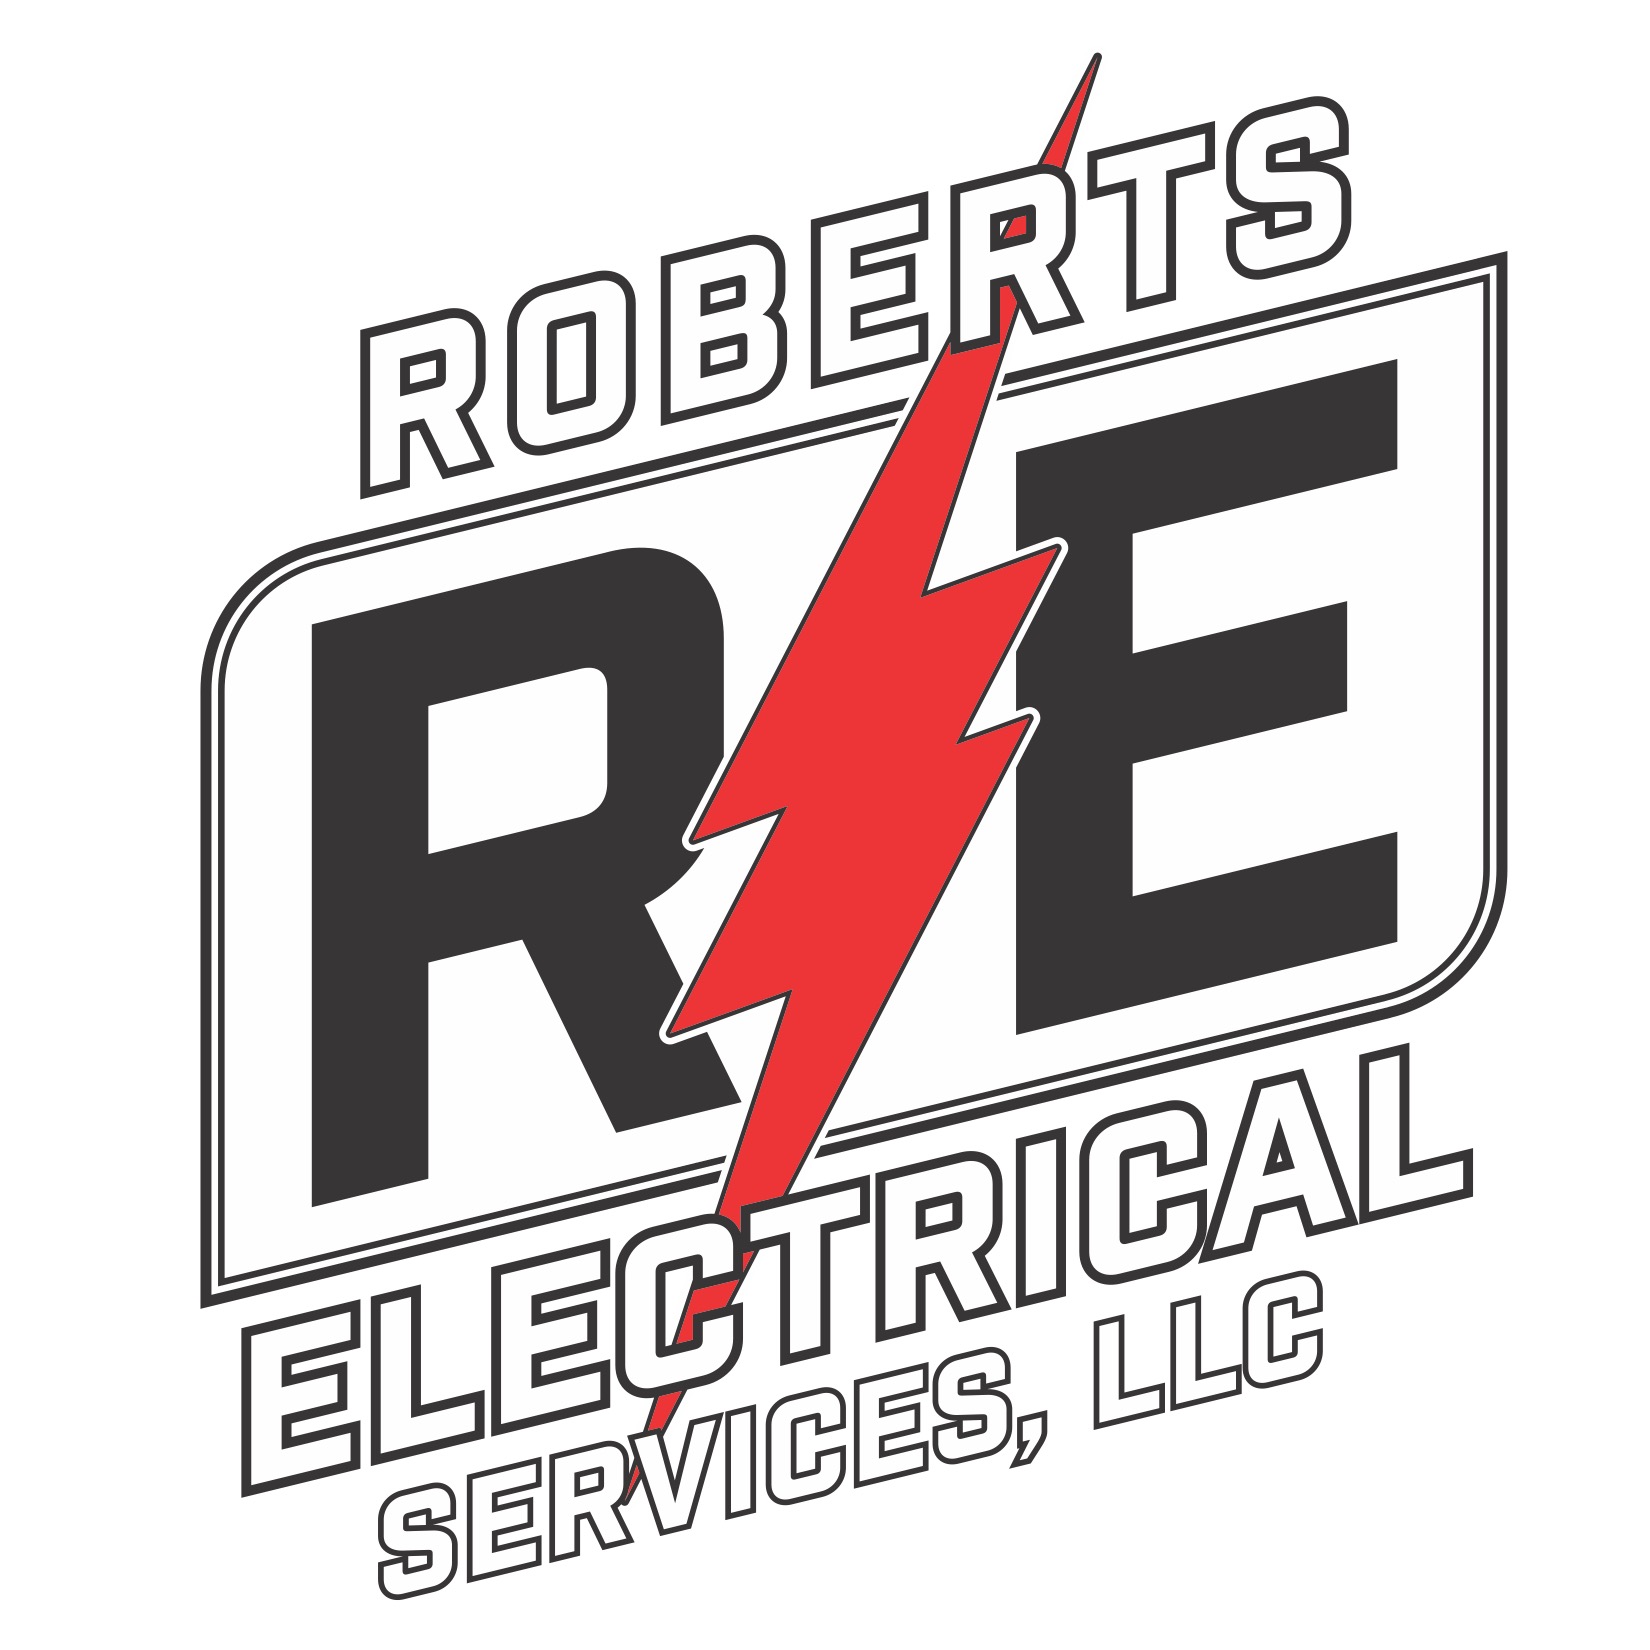 Roberts Electrical Services, LLC